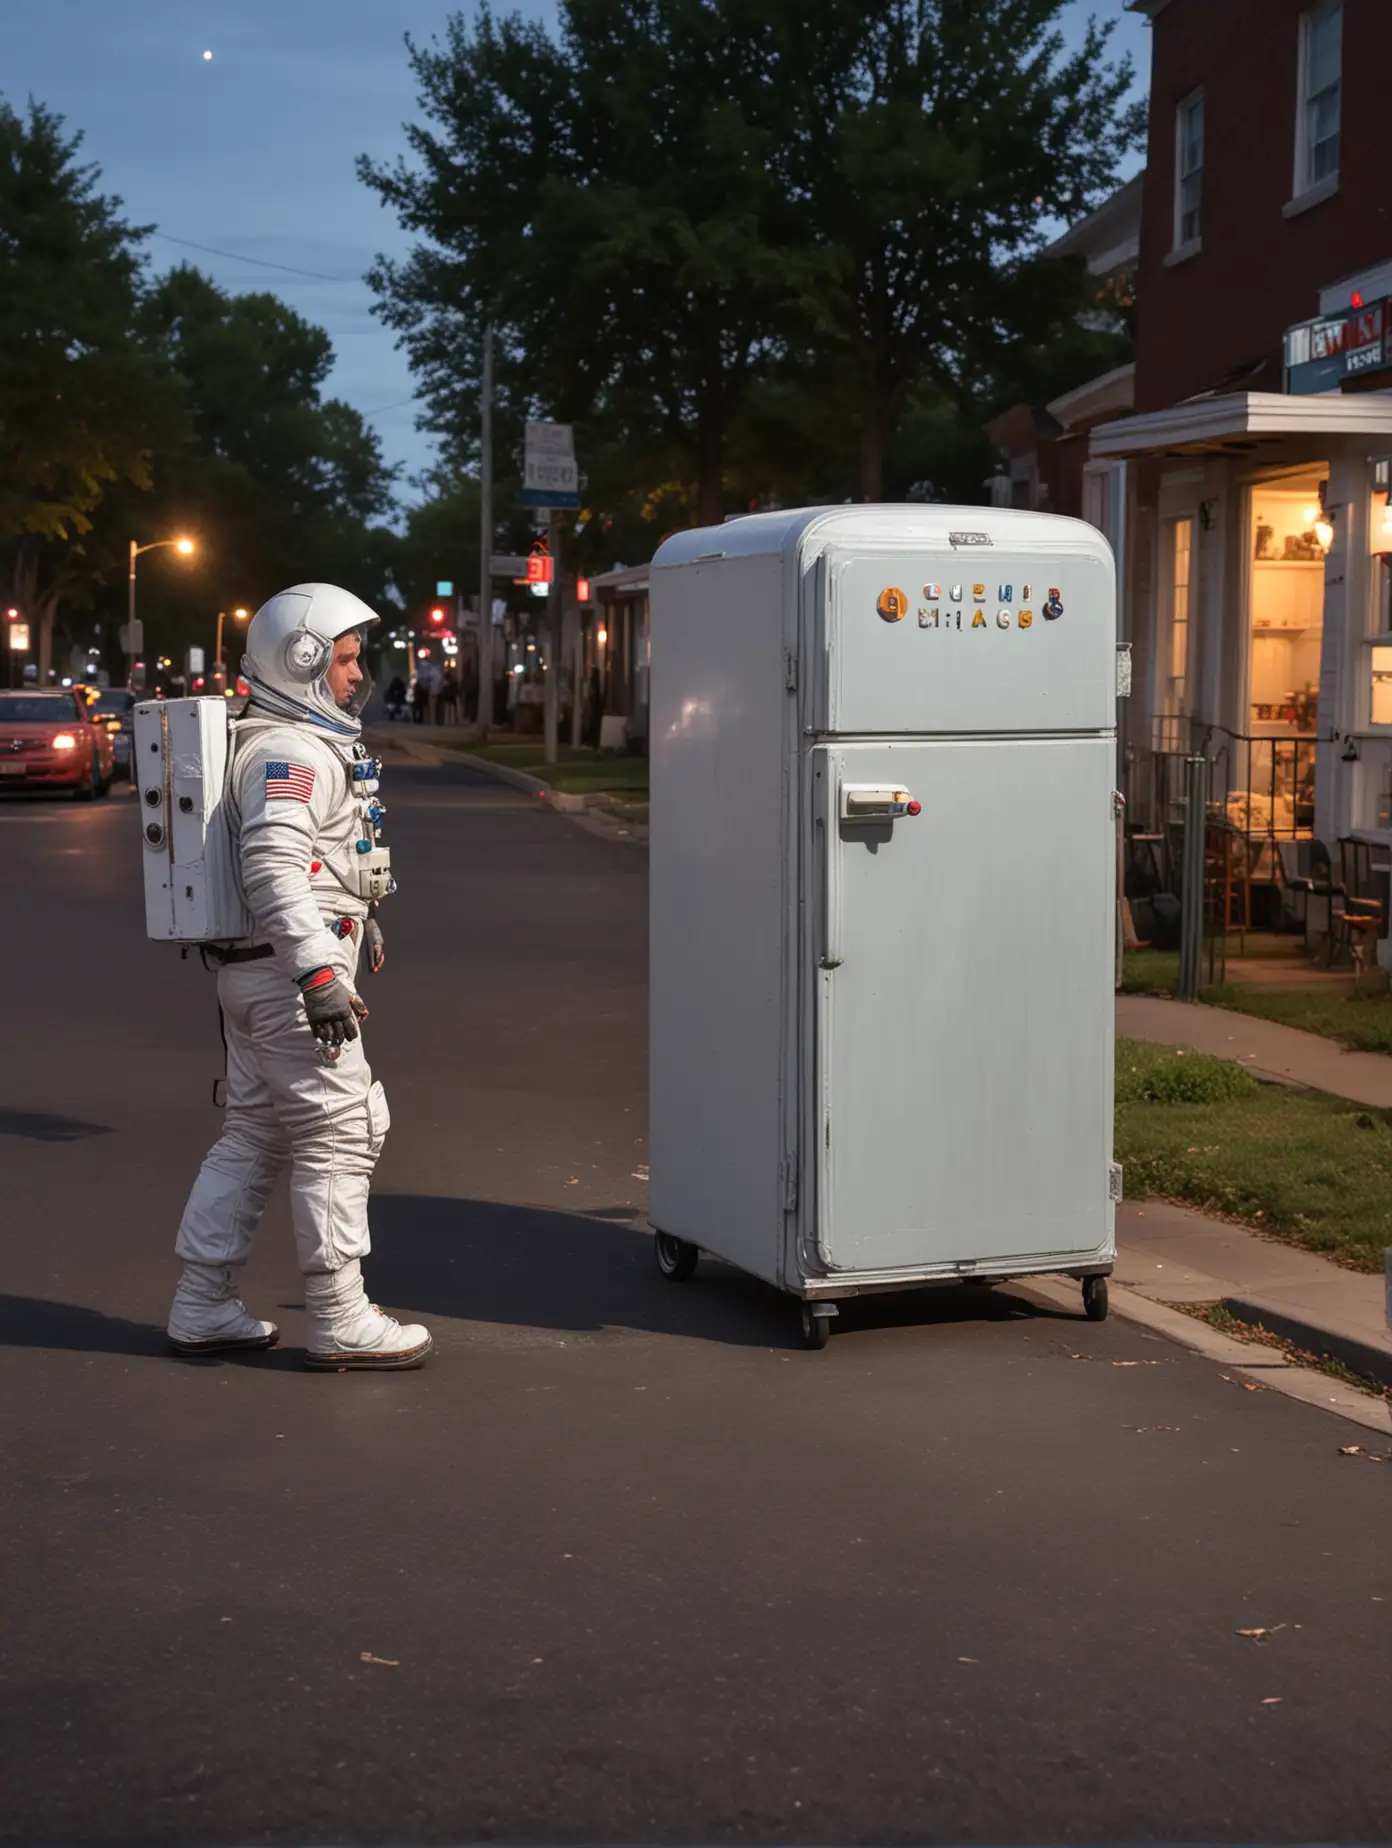 Old fashioned fridge on sidewalk  with man in space suit crossing the road at dusk